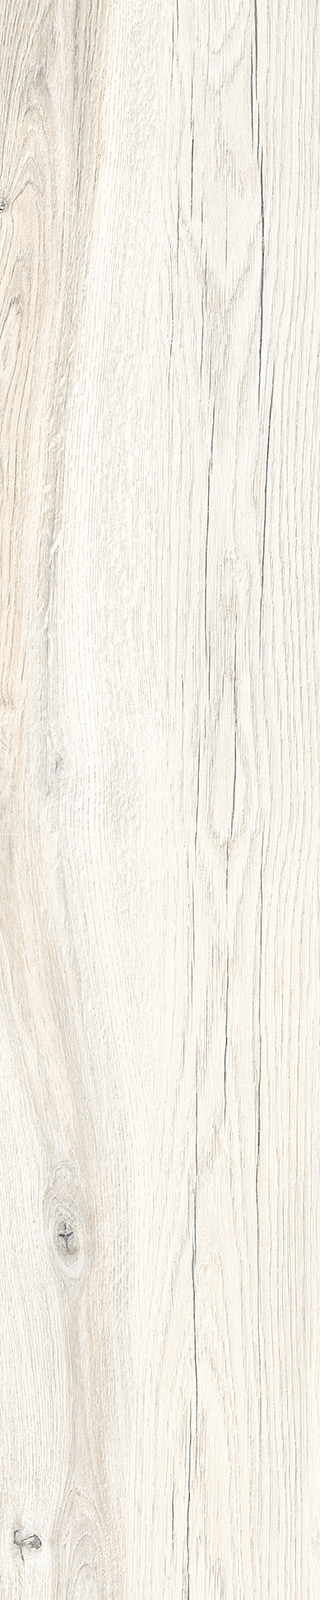 Timber Lux Ivory